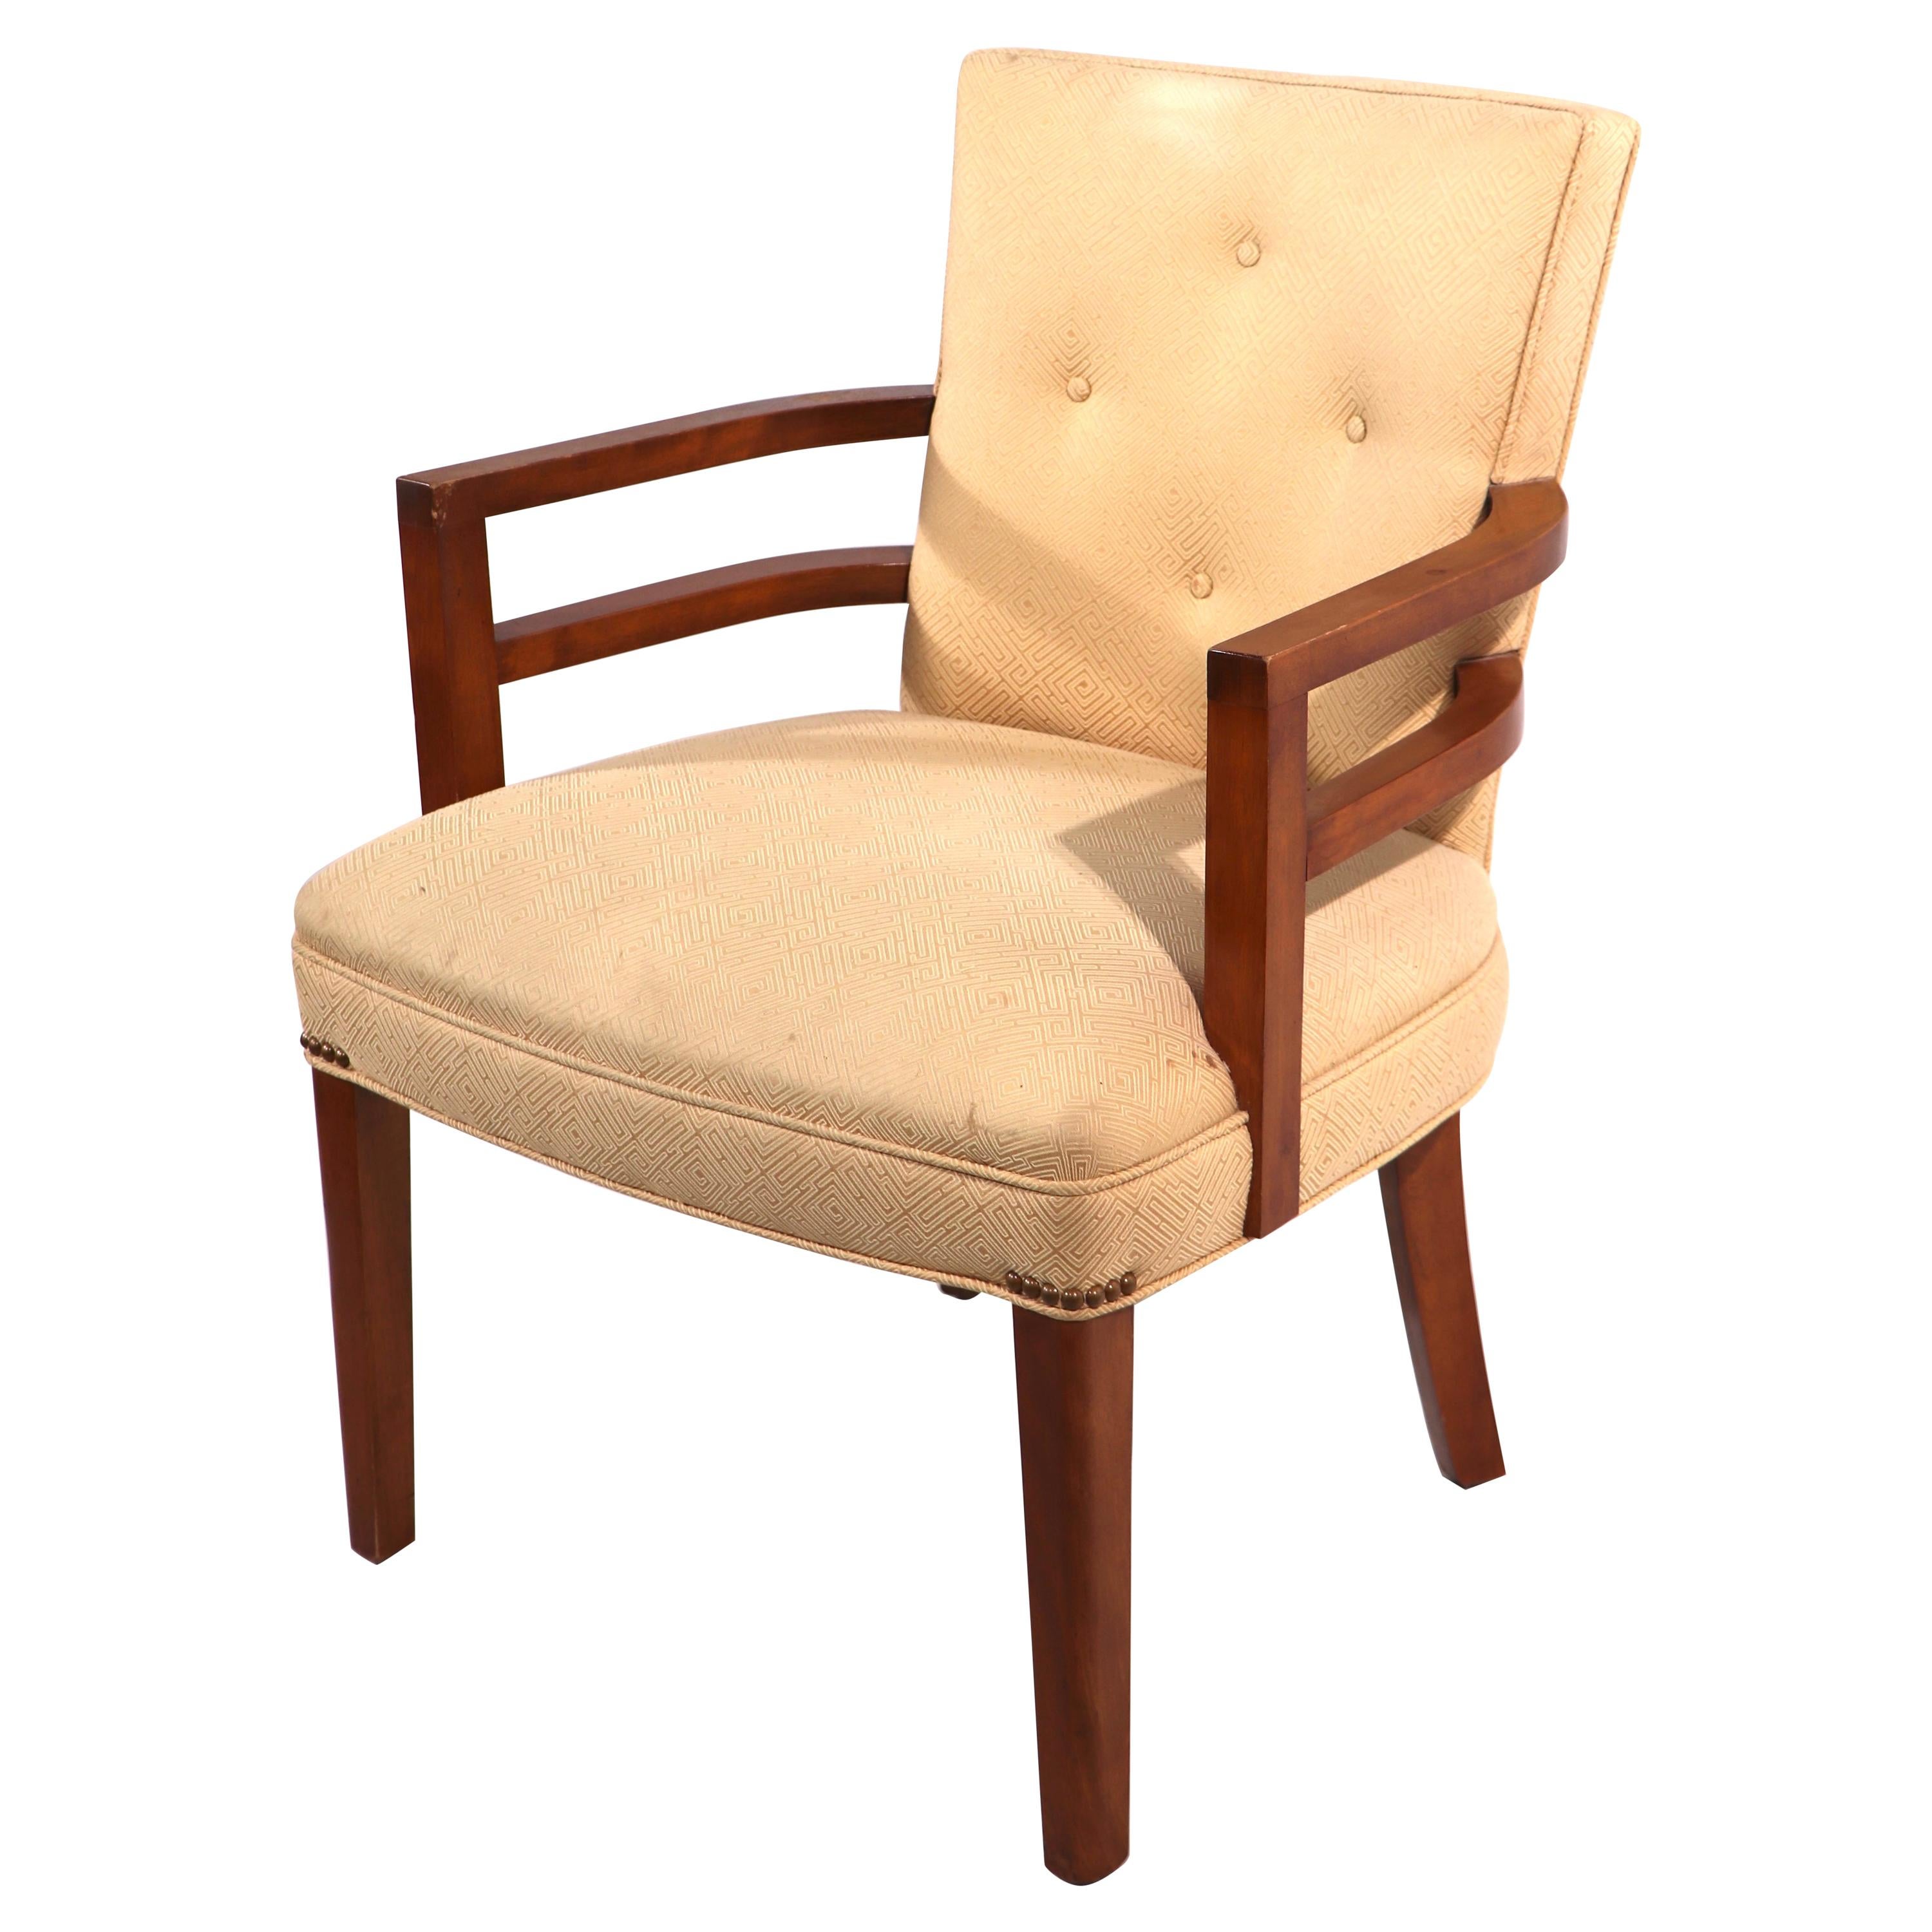 Machine Age Art Deco Arm Chair in the Style of Gilbert Rohde For Sale